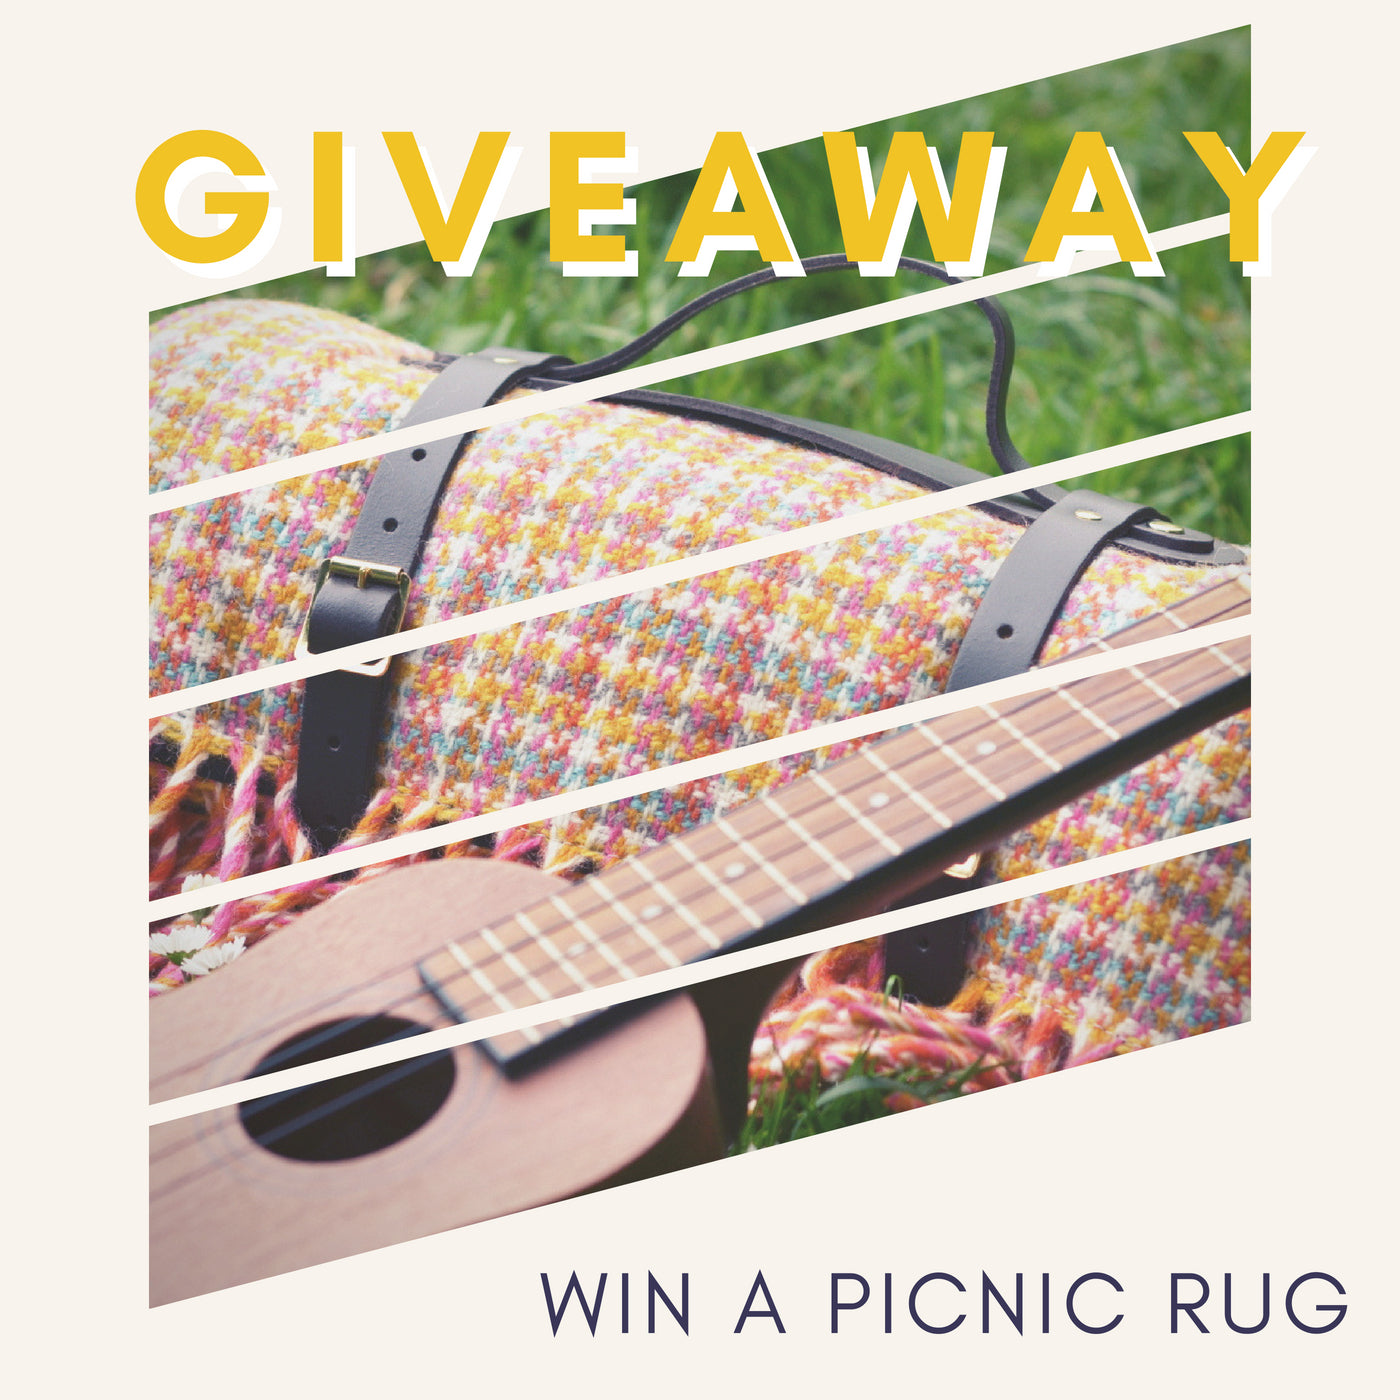 GIVEAWAY! Win a luxury picnic rug worth £99